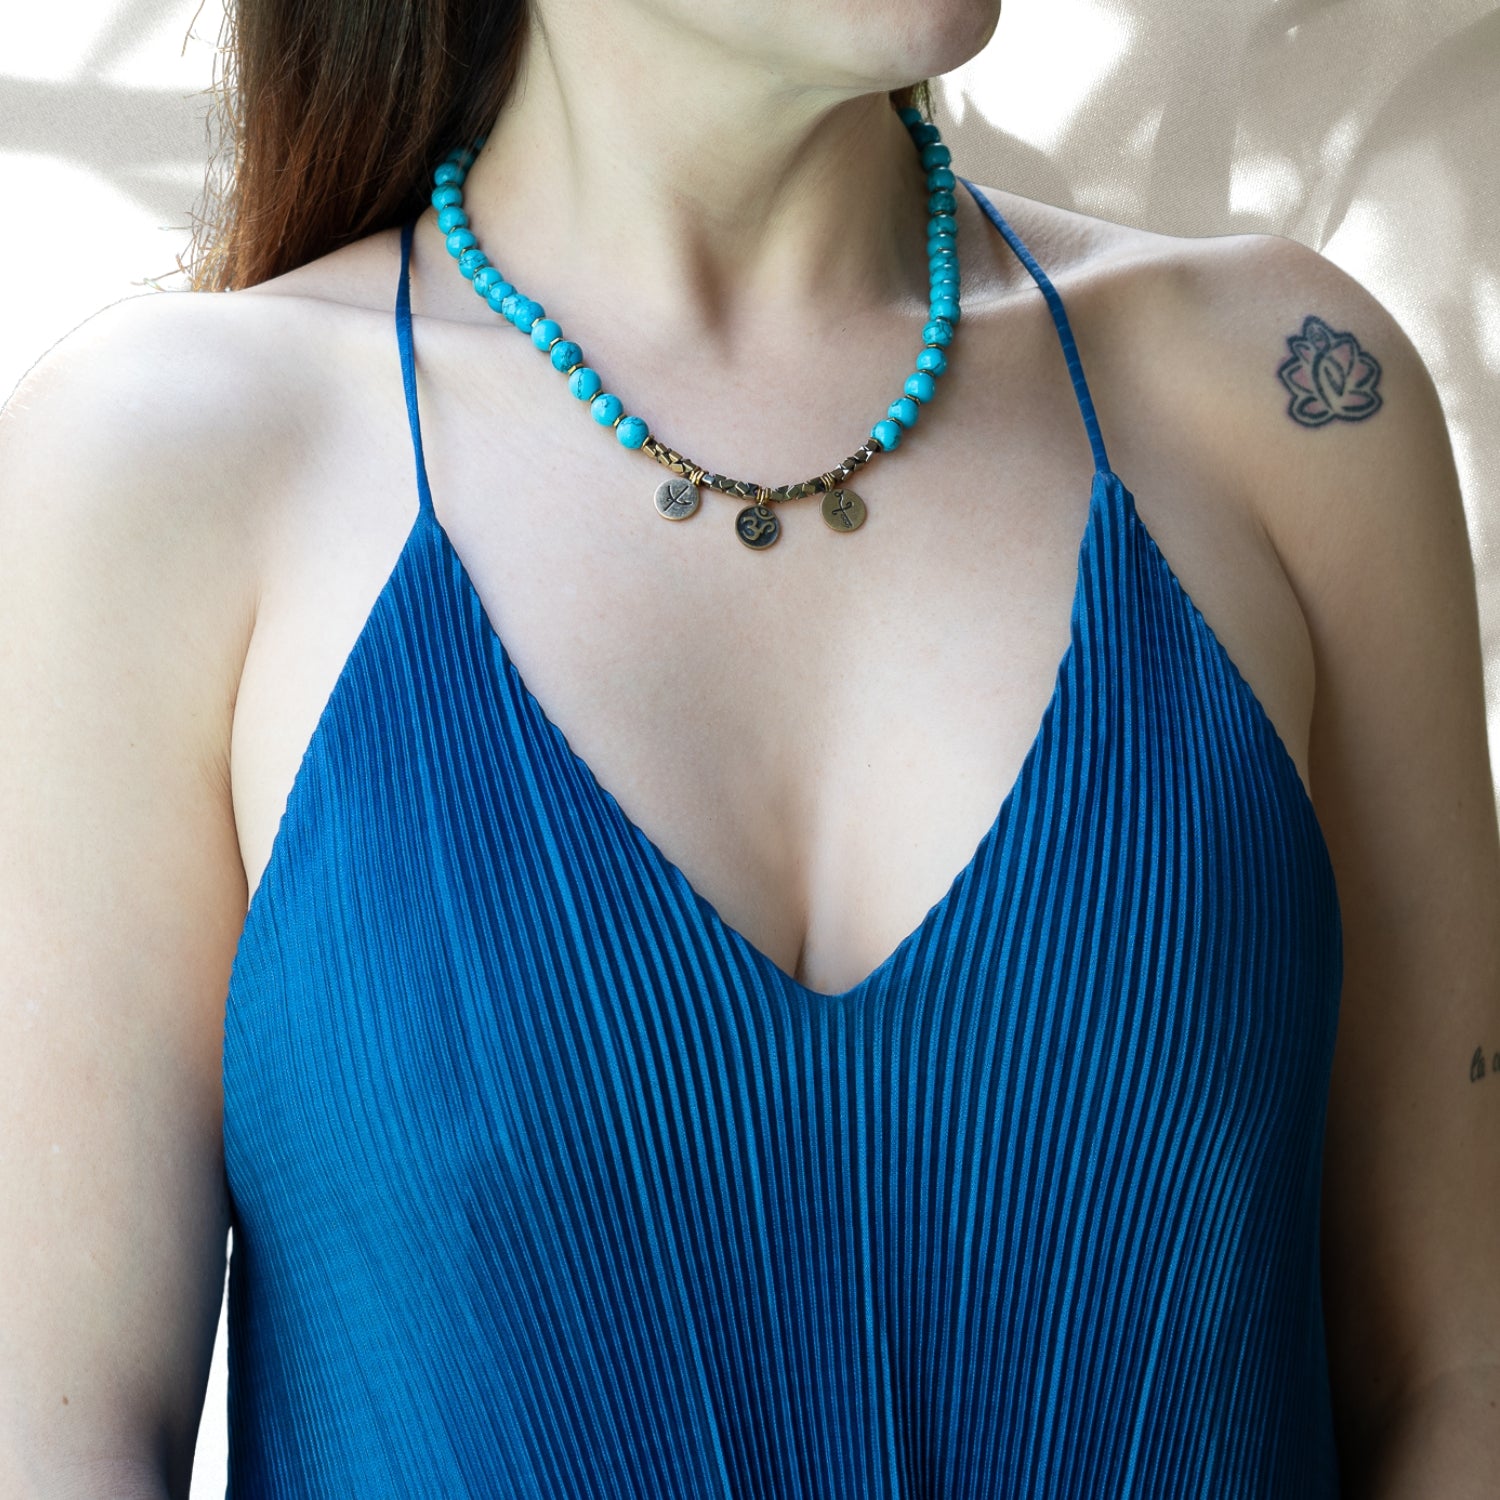 Model wearing the Mystic Meditation Necklace, embodying peace and spiritual connection.